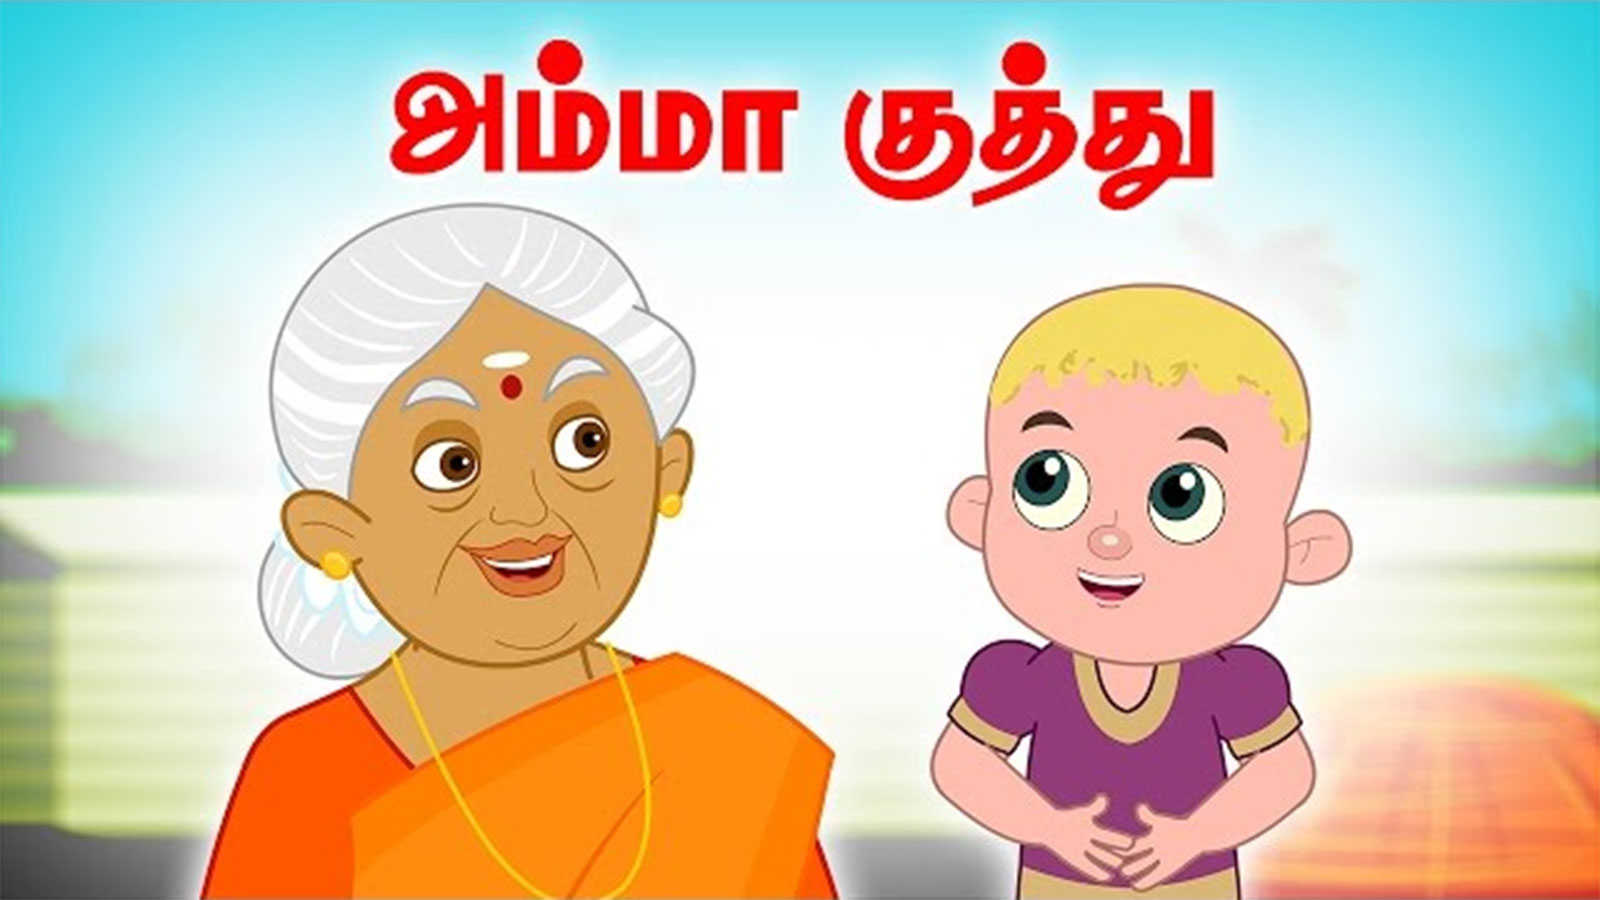 Best Children Tamil Nursery Song 'Amma Kuthu' - Kids Nursery Songs In Tamil  | Entertainment - Times of India Videos